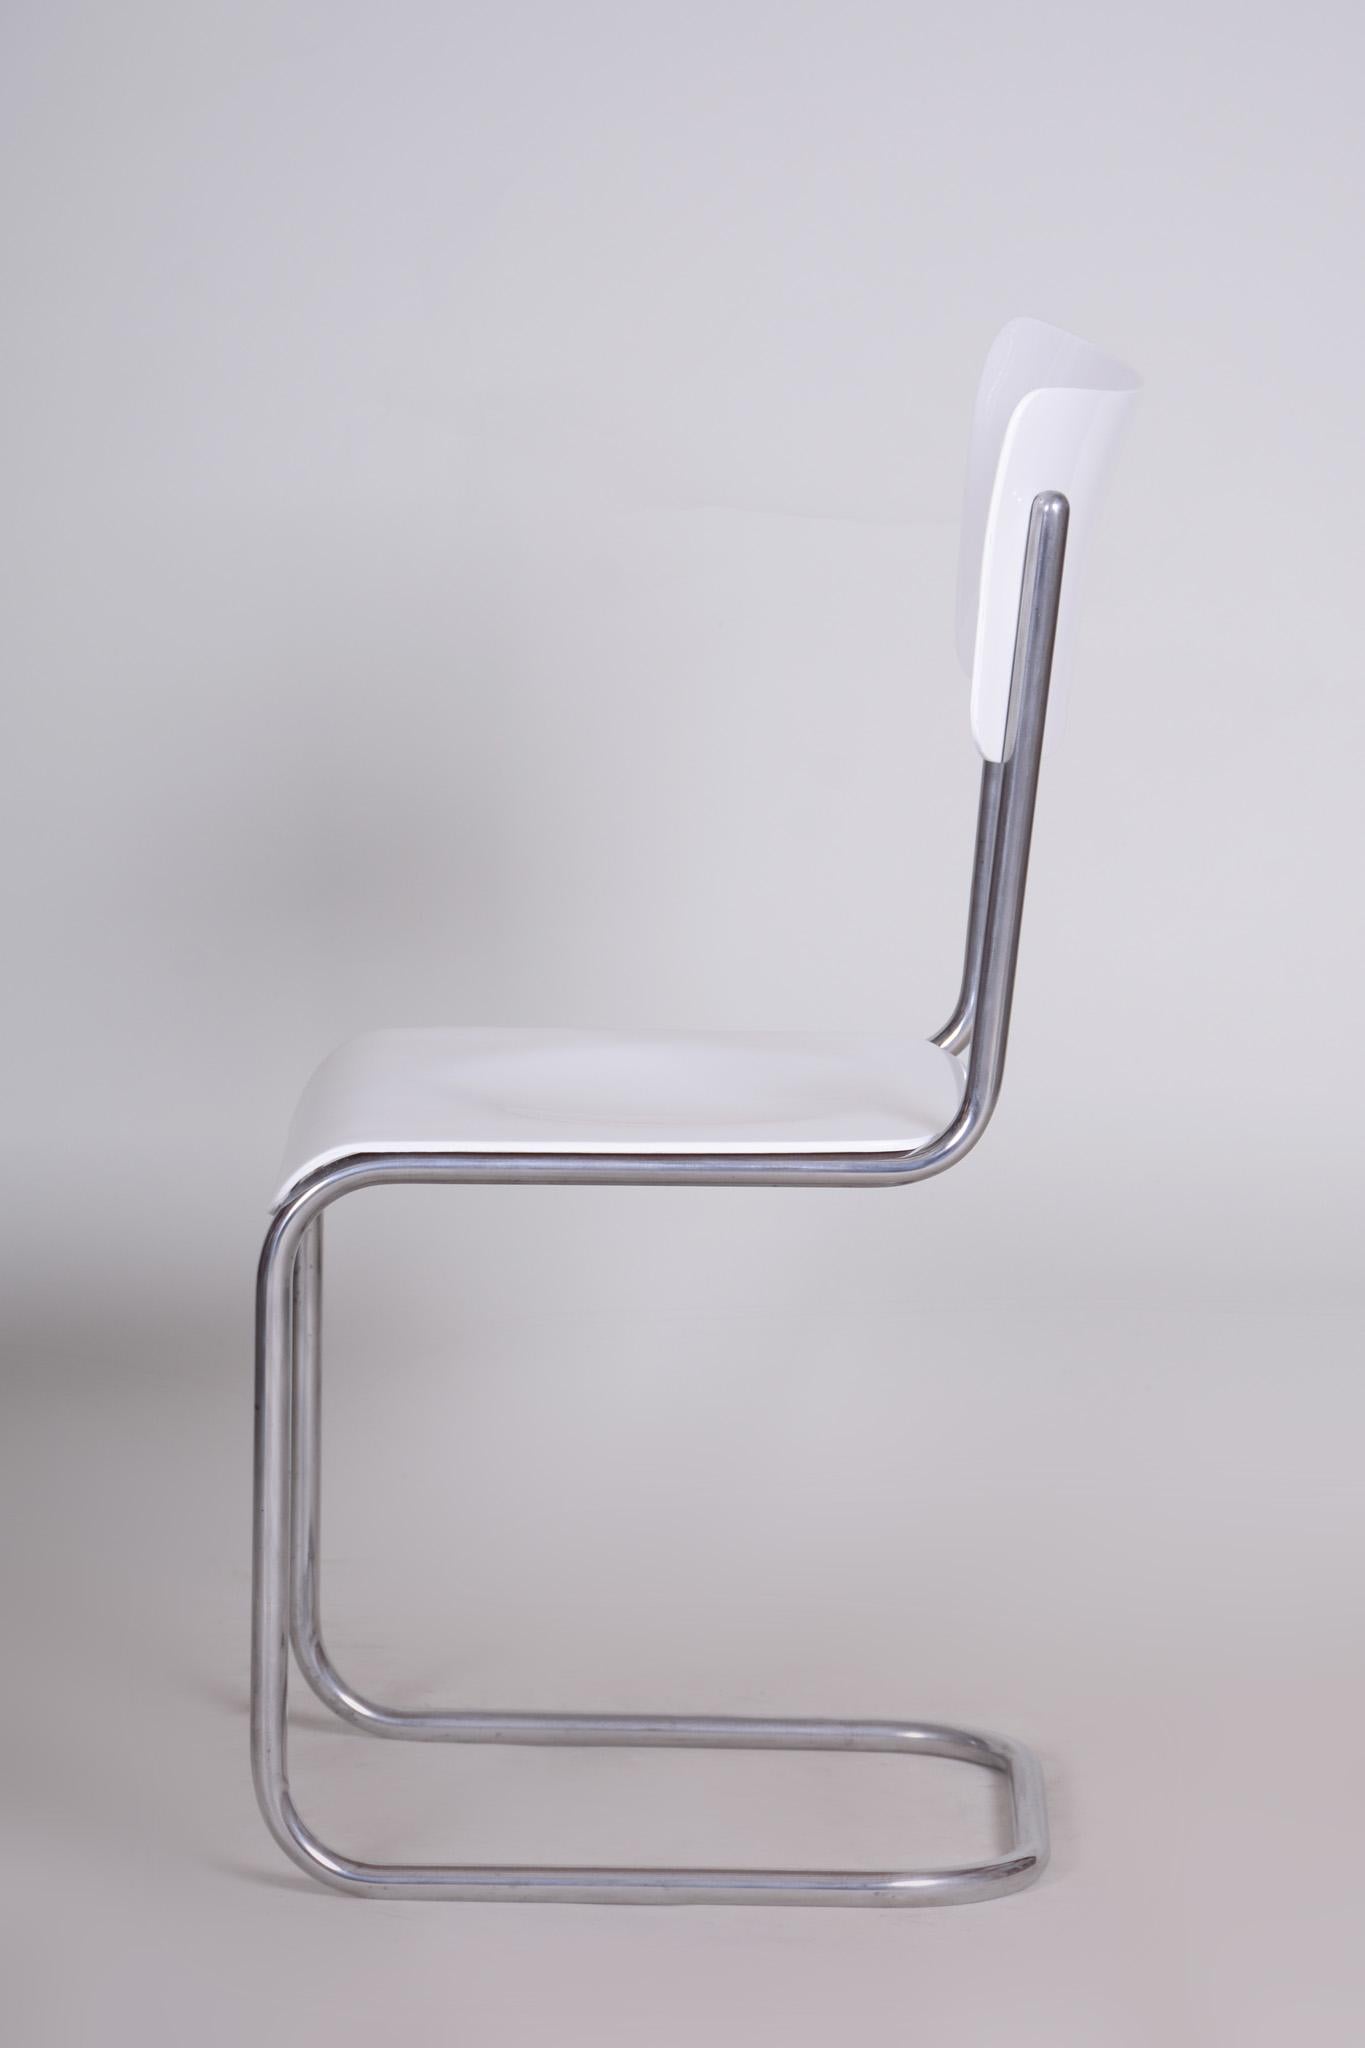 Czech Restored White Vintage Bauhaus Chair Manufactured by Vichr a Spol, 1930-1939 For Sale